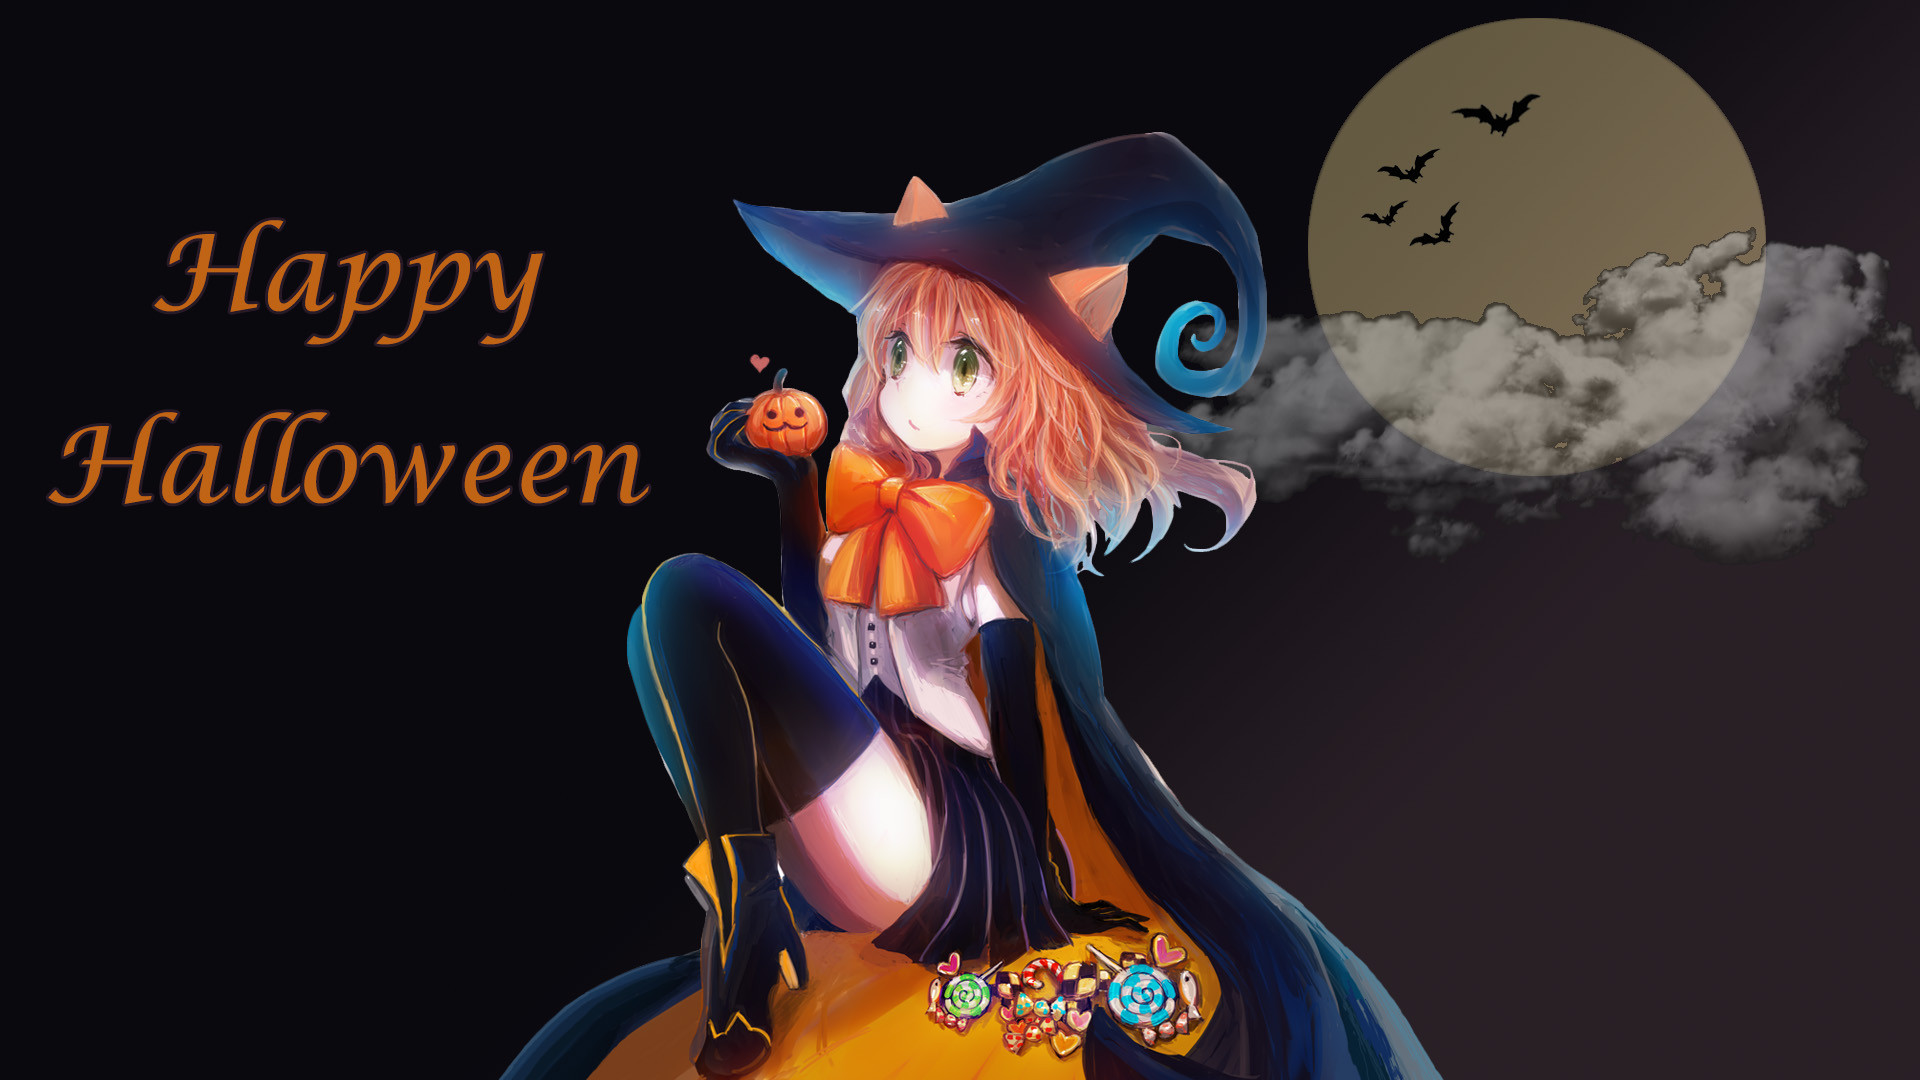 Anime Paradaisu  Happy Halloween everyone Make sure you stop by the shop  today in your costumes we have mini cupcakes for cosplayers today   Facebook